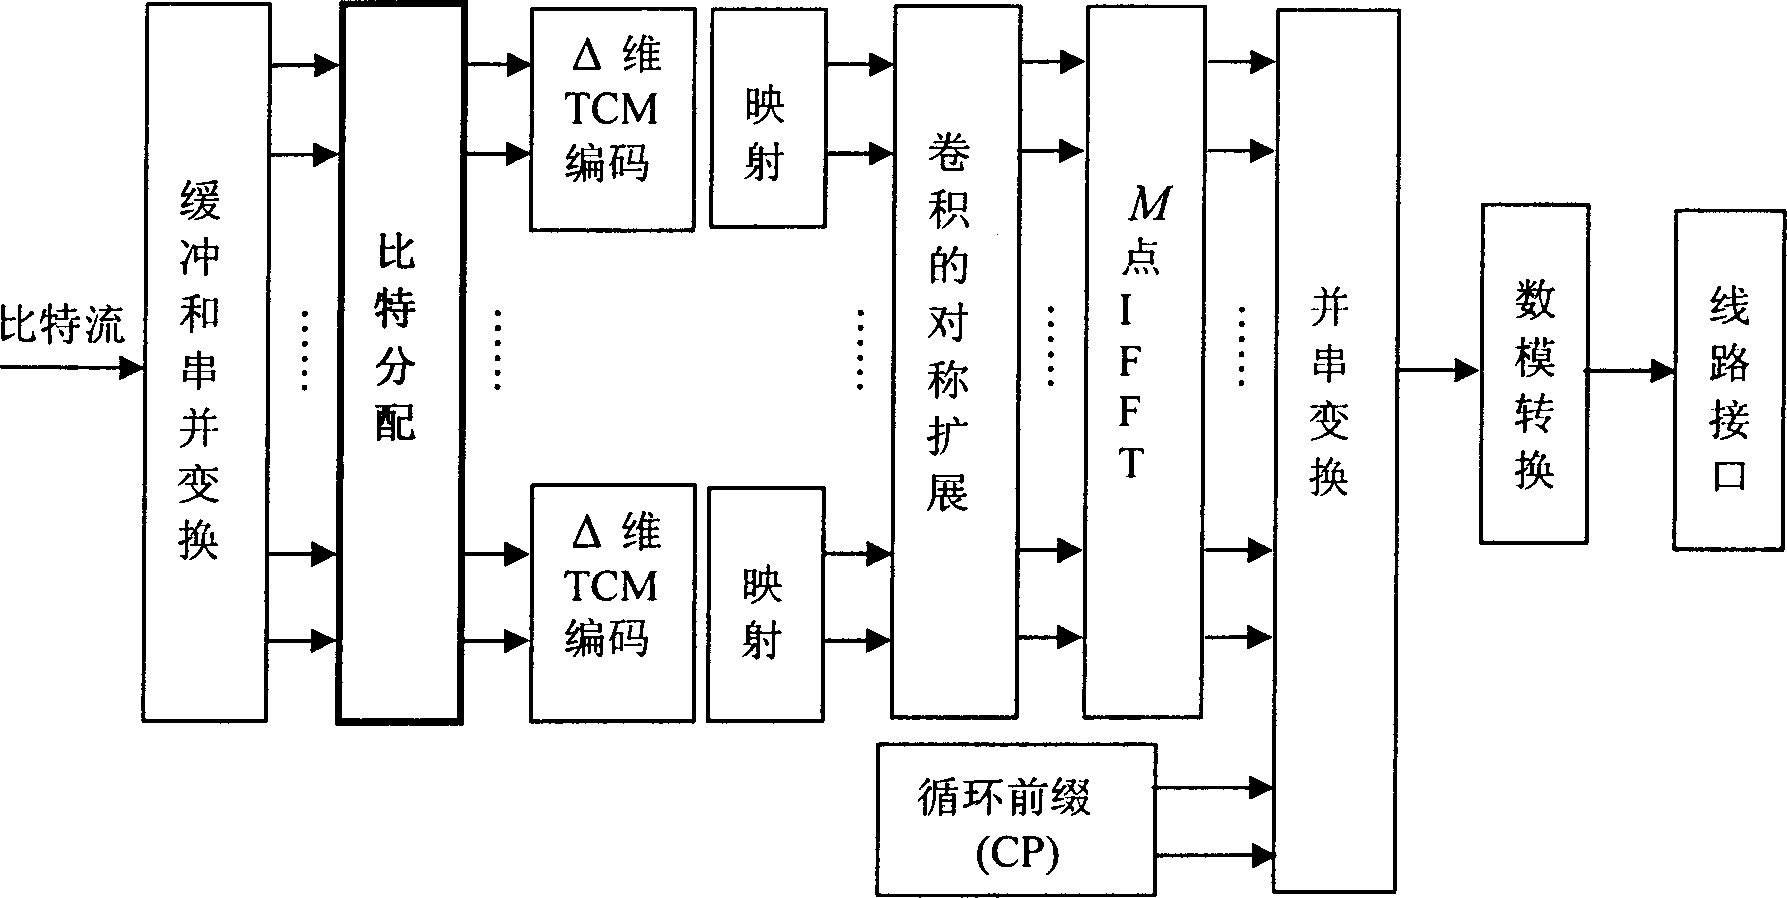 Multi sub-channel parallel bit loading method for optimal power distribution in DMT system